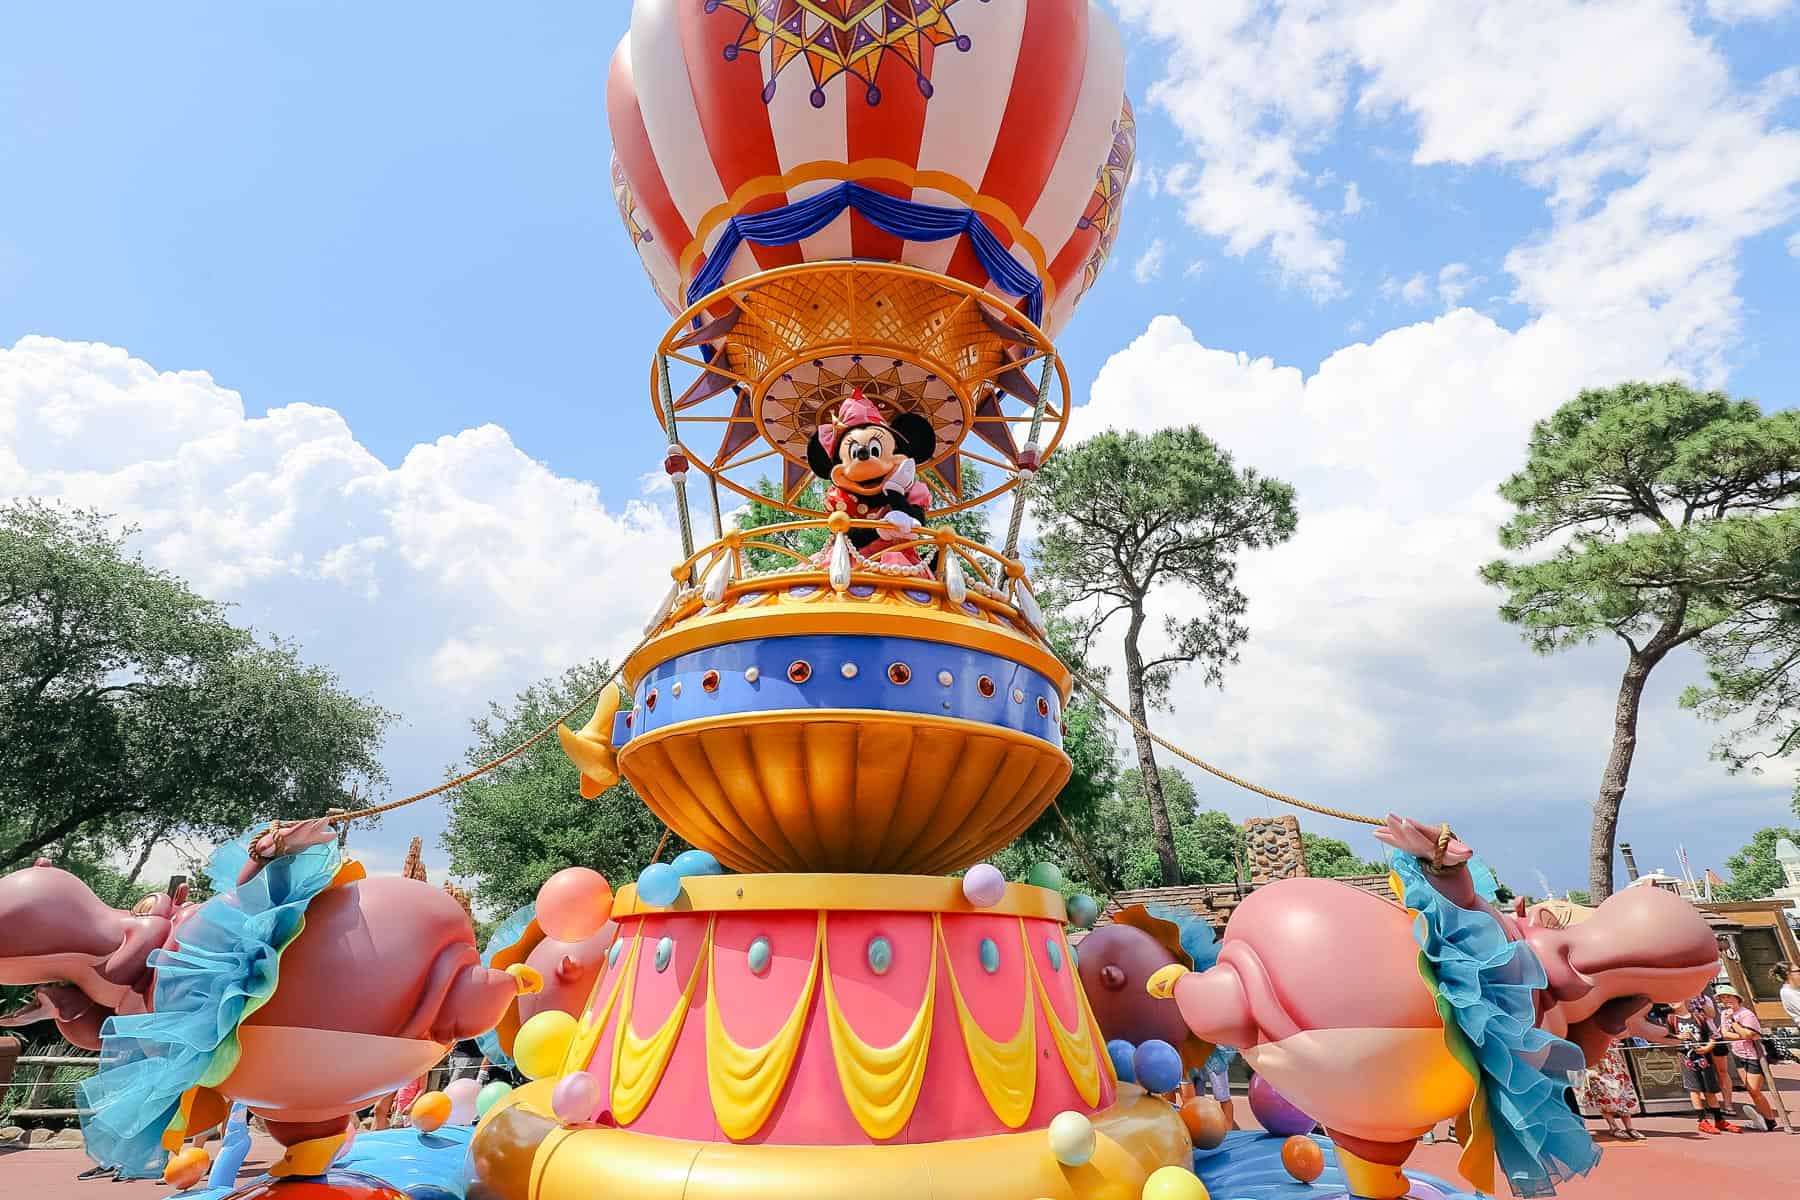 Minnie poses for a photo in Mickey's Airship during the Festival of Fantasy Parade. 